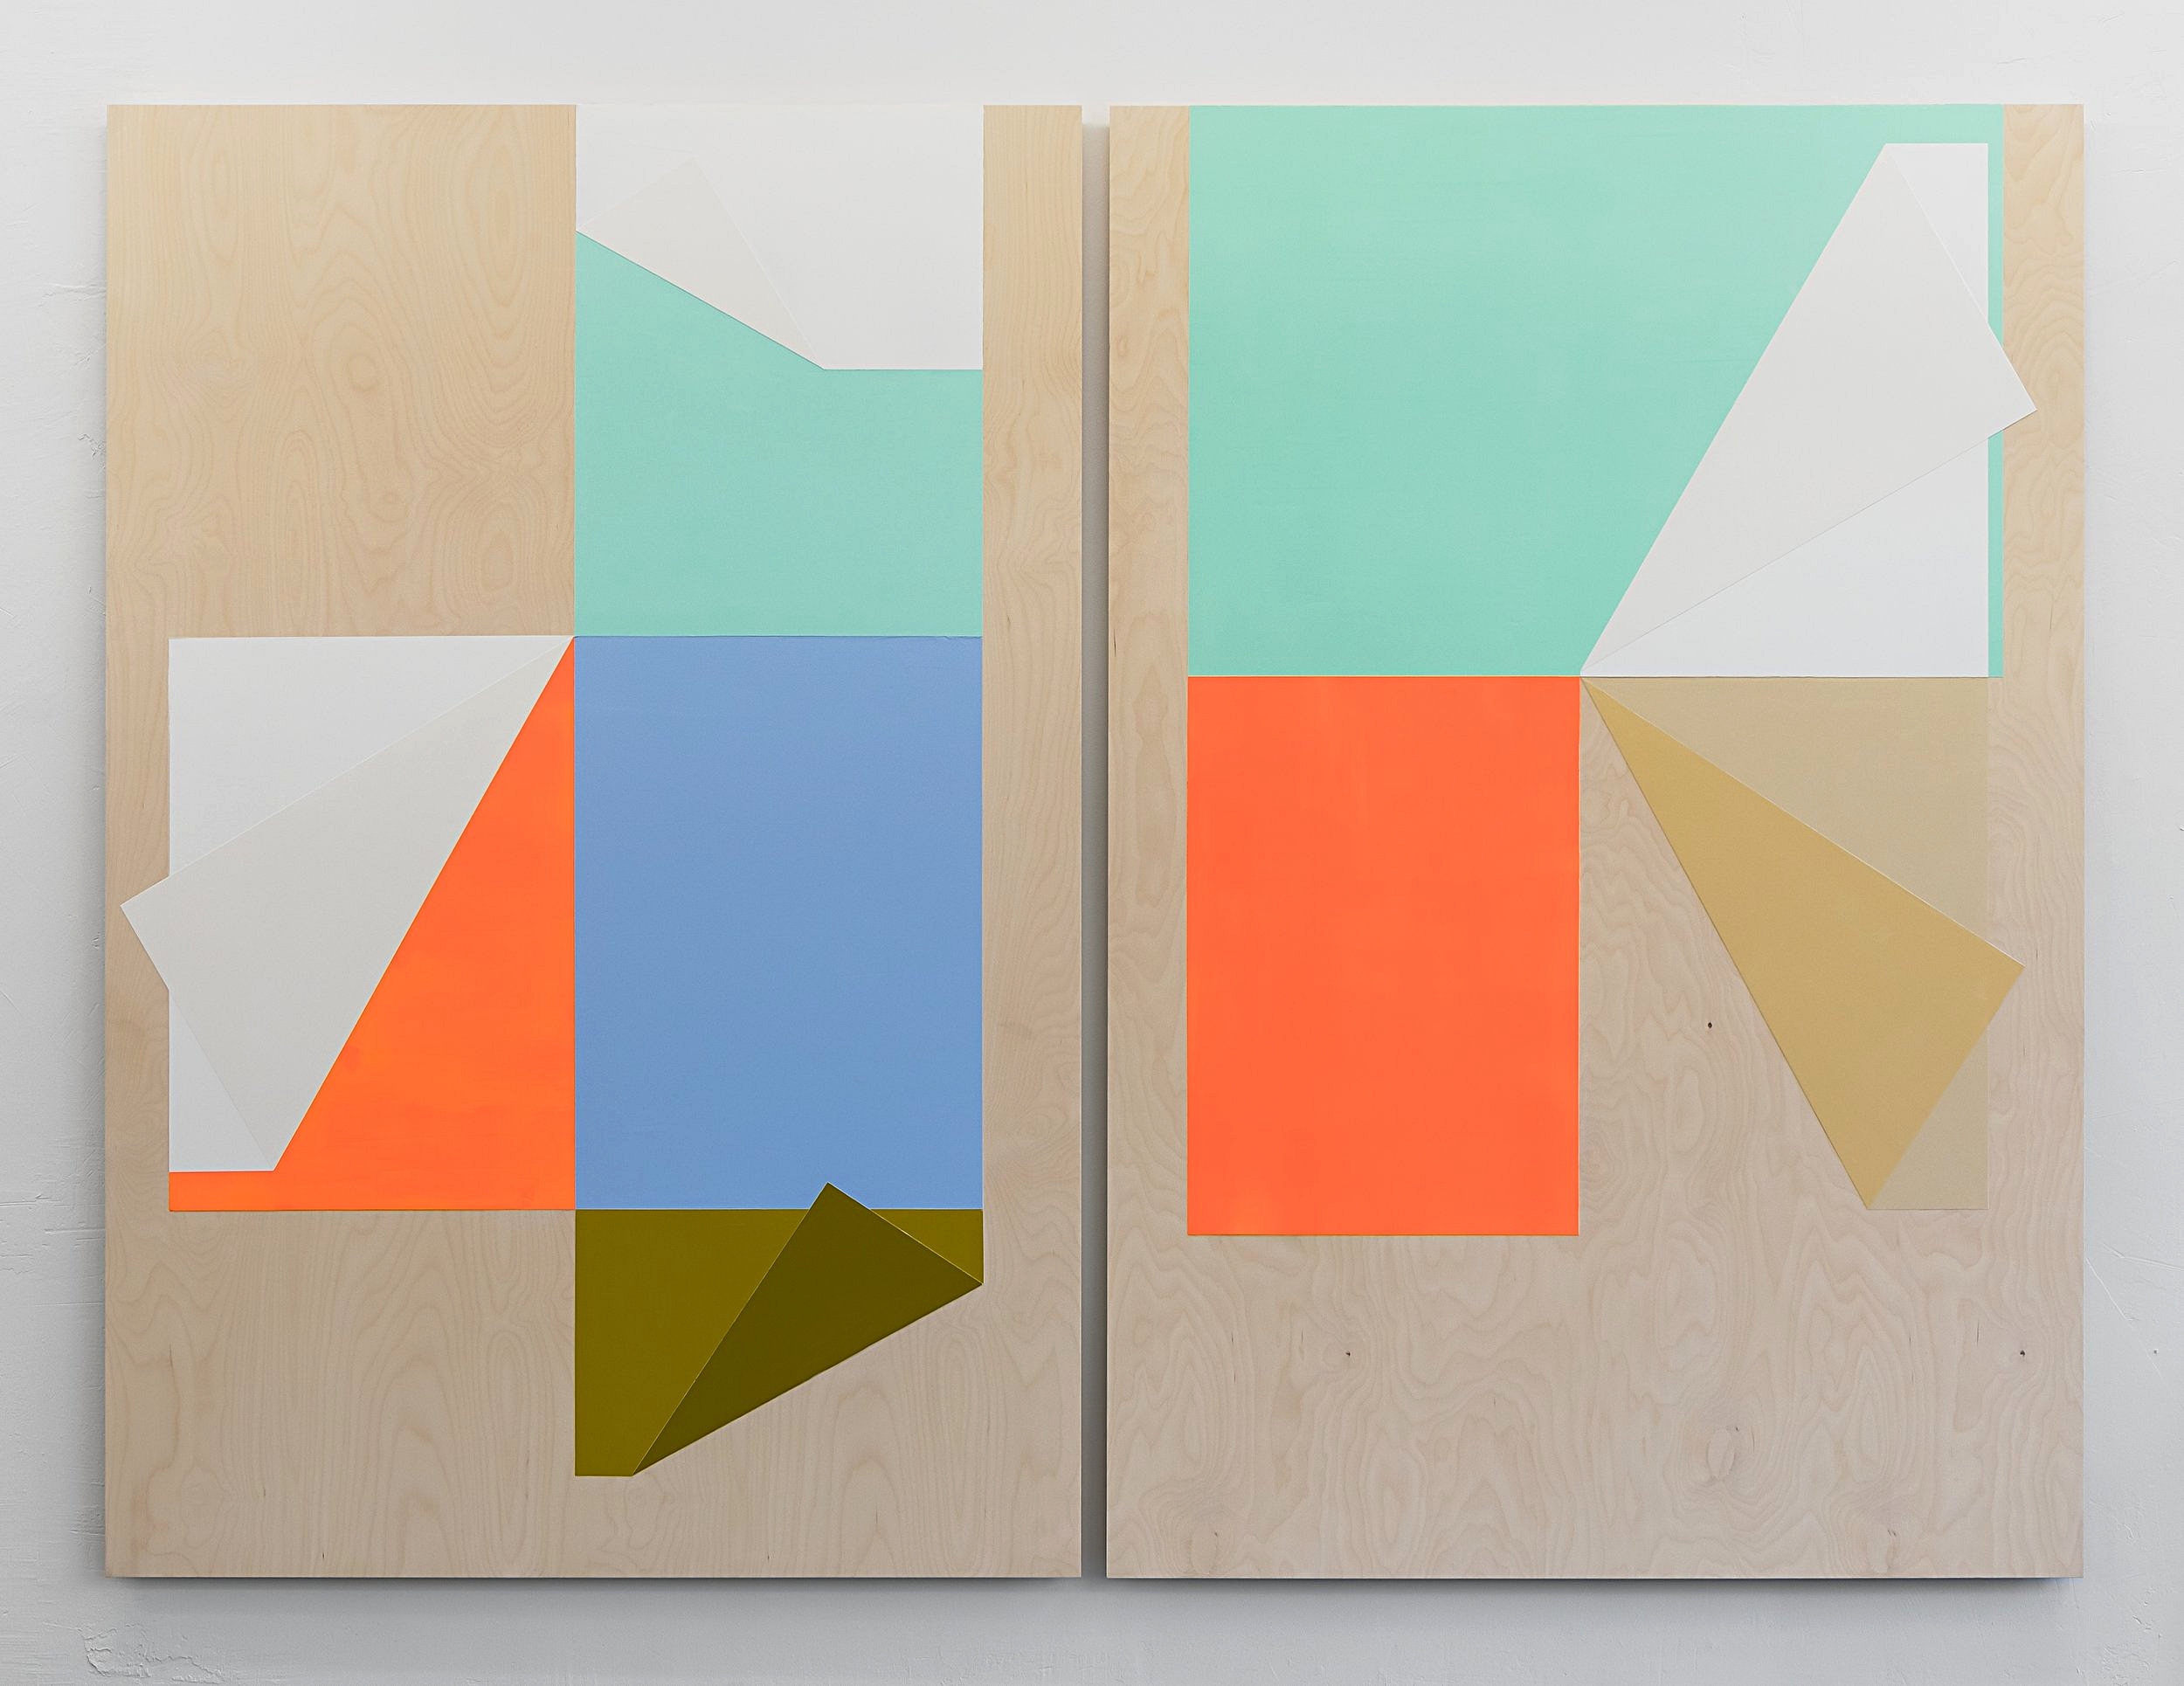  Untitled (Diptych), 2016. Acrylic and gesso on birch plywood. 2 panels 180 x 120 cm. Overall 180 x 244 cm 